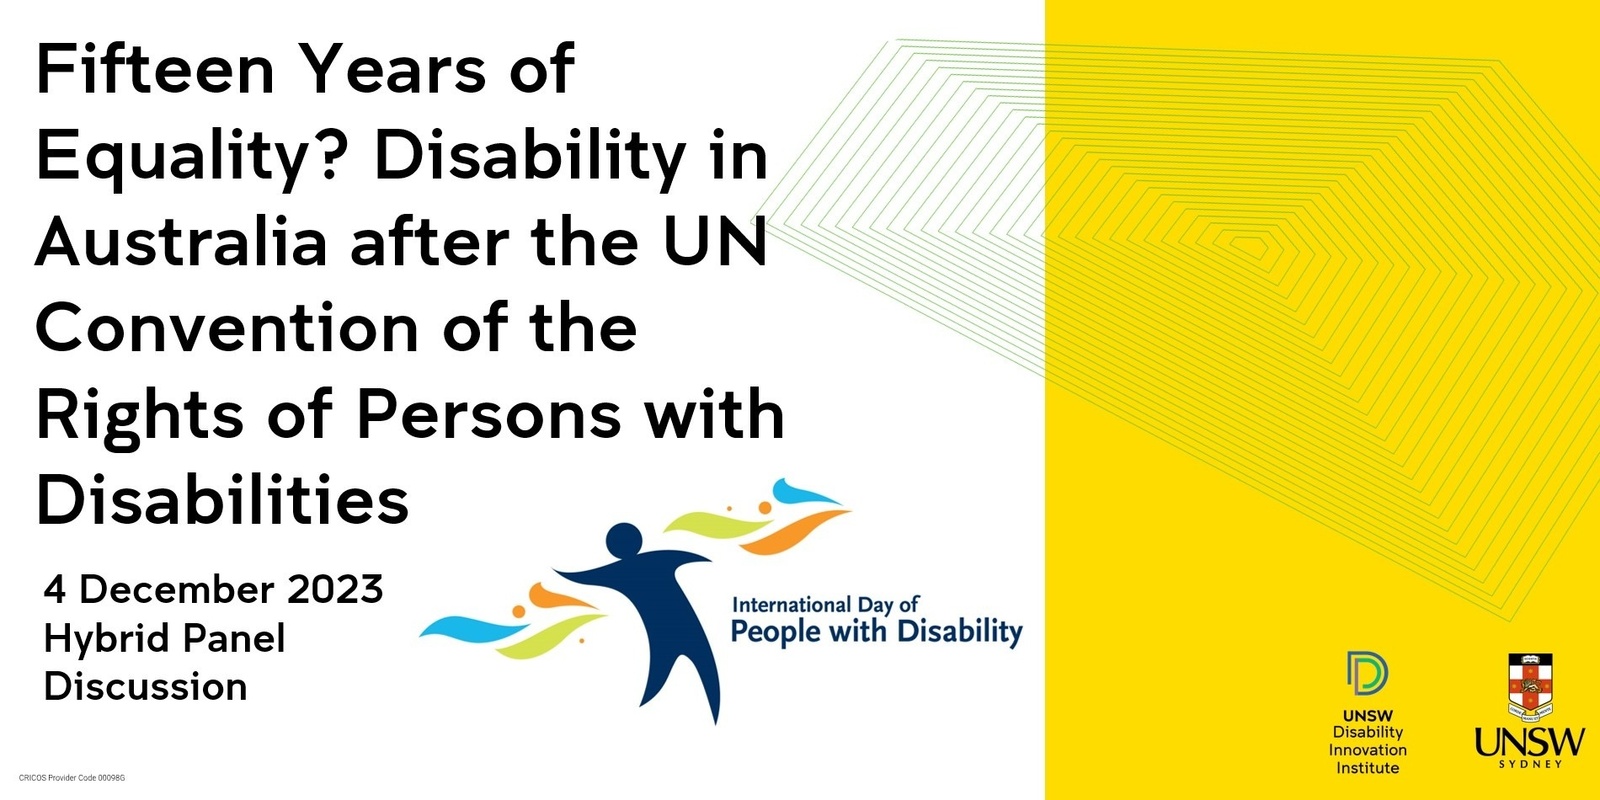 Banner image for Fifteen Years of Equality? Disability in Australia after the UN Convention of the Rights of Persons with Disabilities